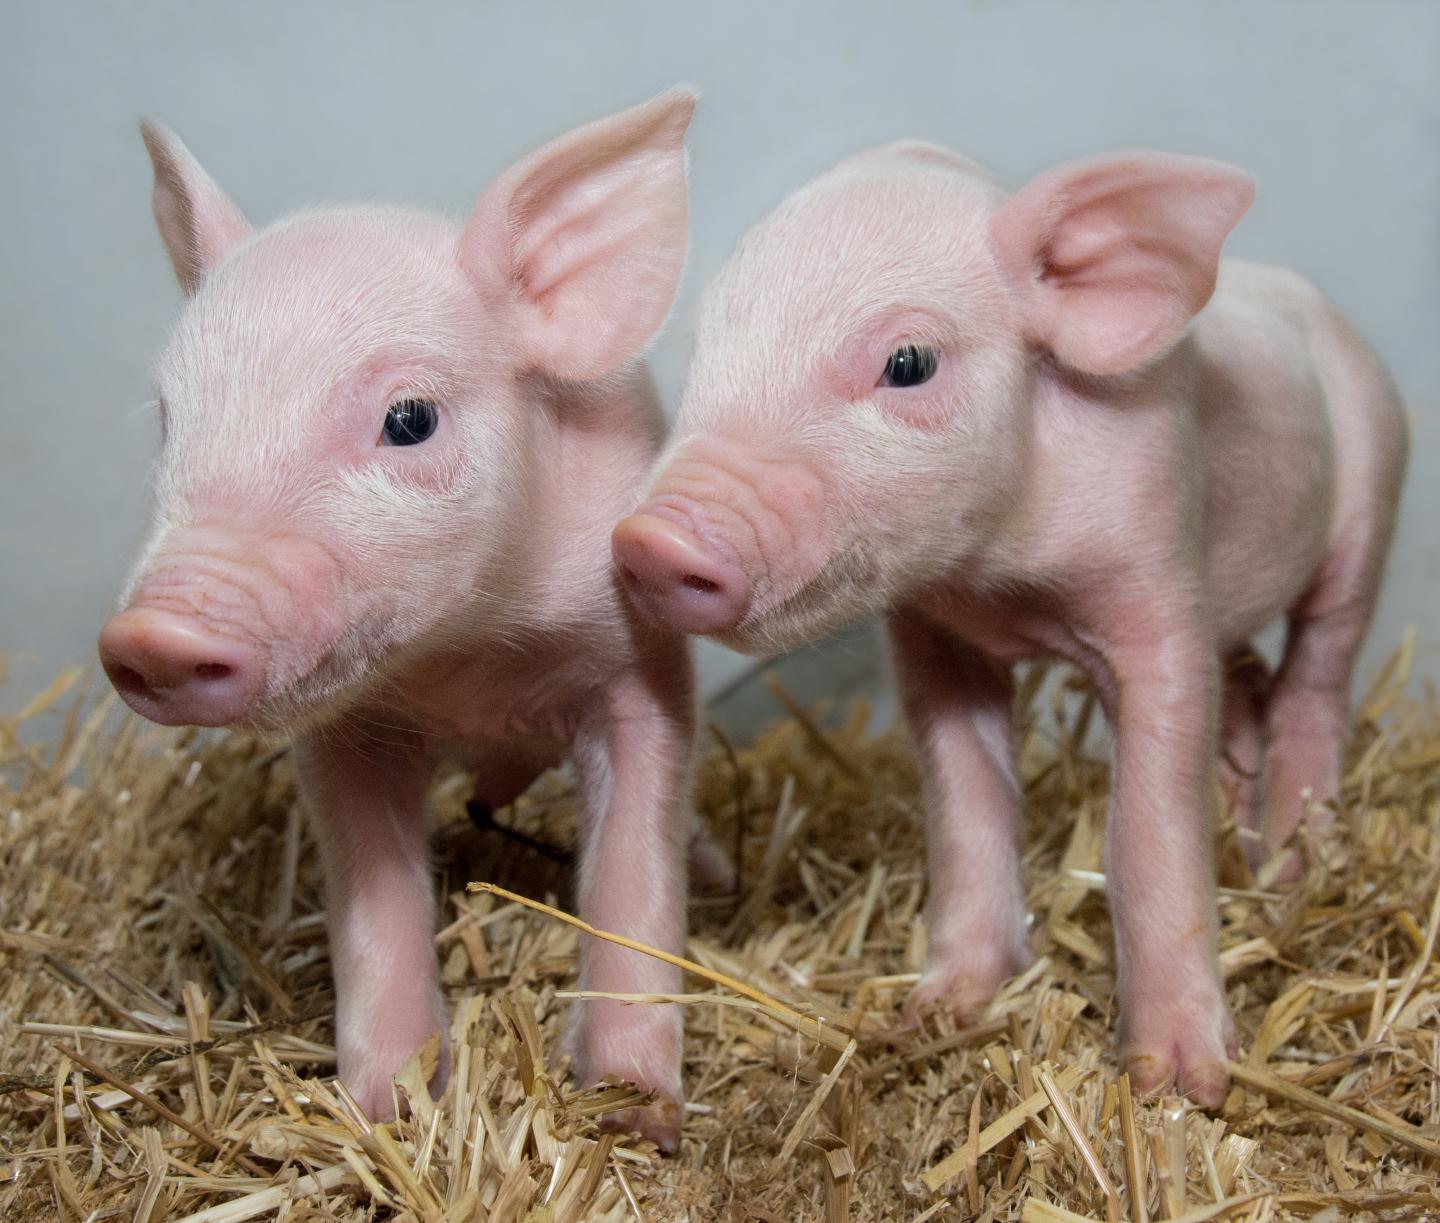 Scientists have produced pigs that may be protected from an infection that costs the swine industry billions each year. The University of Edinburgh team have used advanced genetic techniques to produce pigs that are potentially resistant to porcine reproductive and respiratory syndrome (PRRS). [Laura Dow/The Roslin Institute]